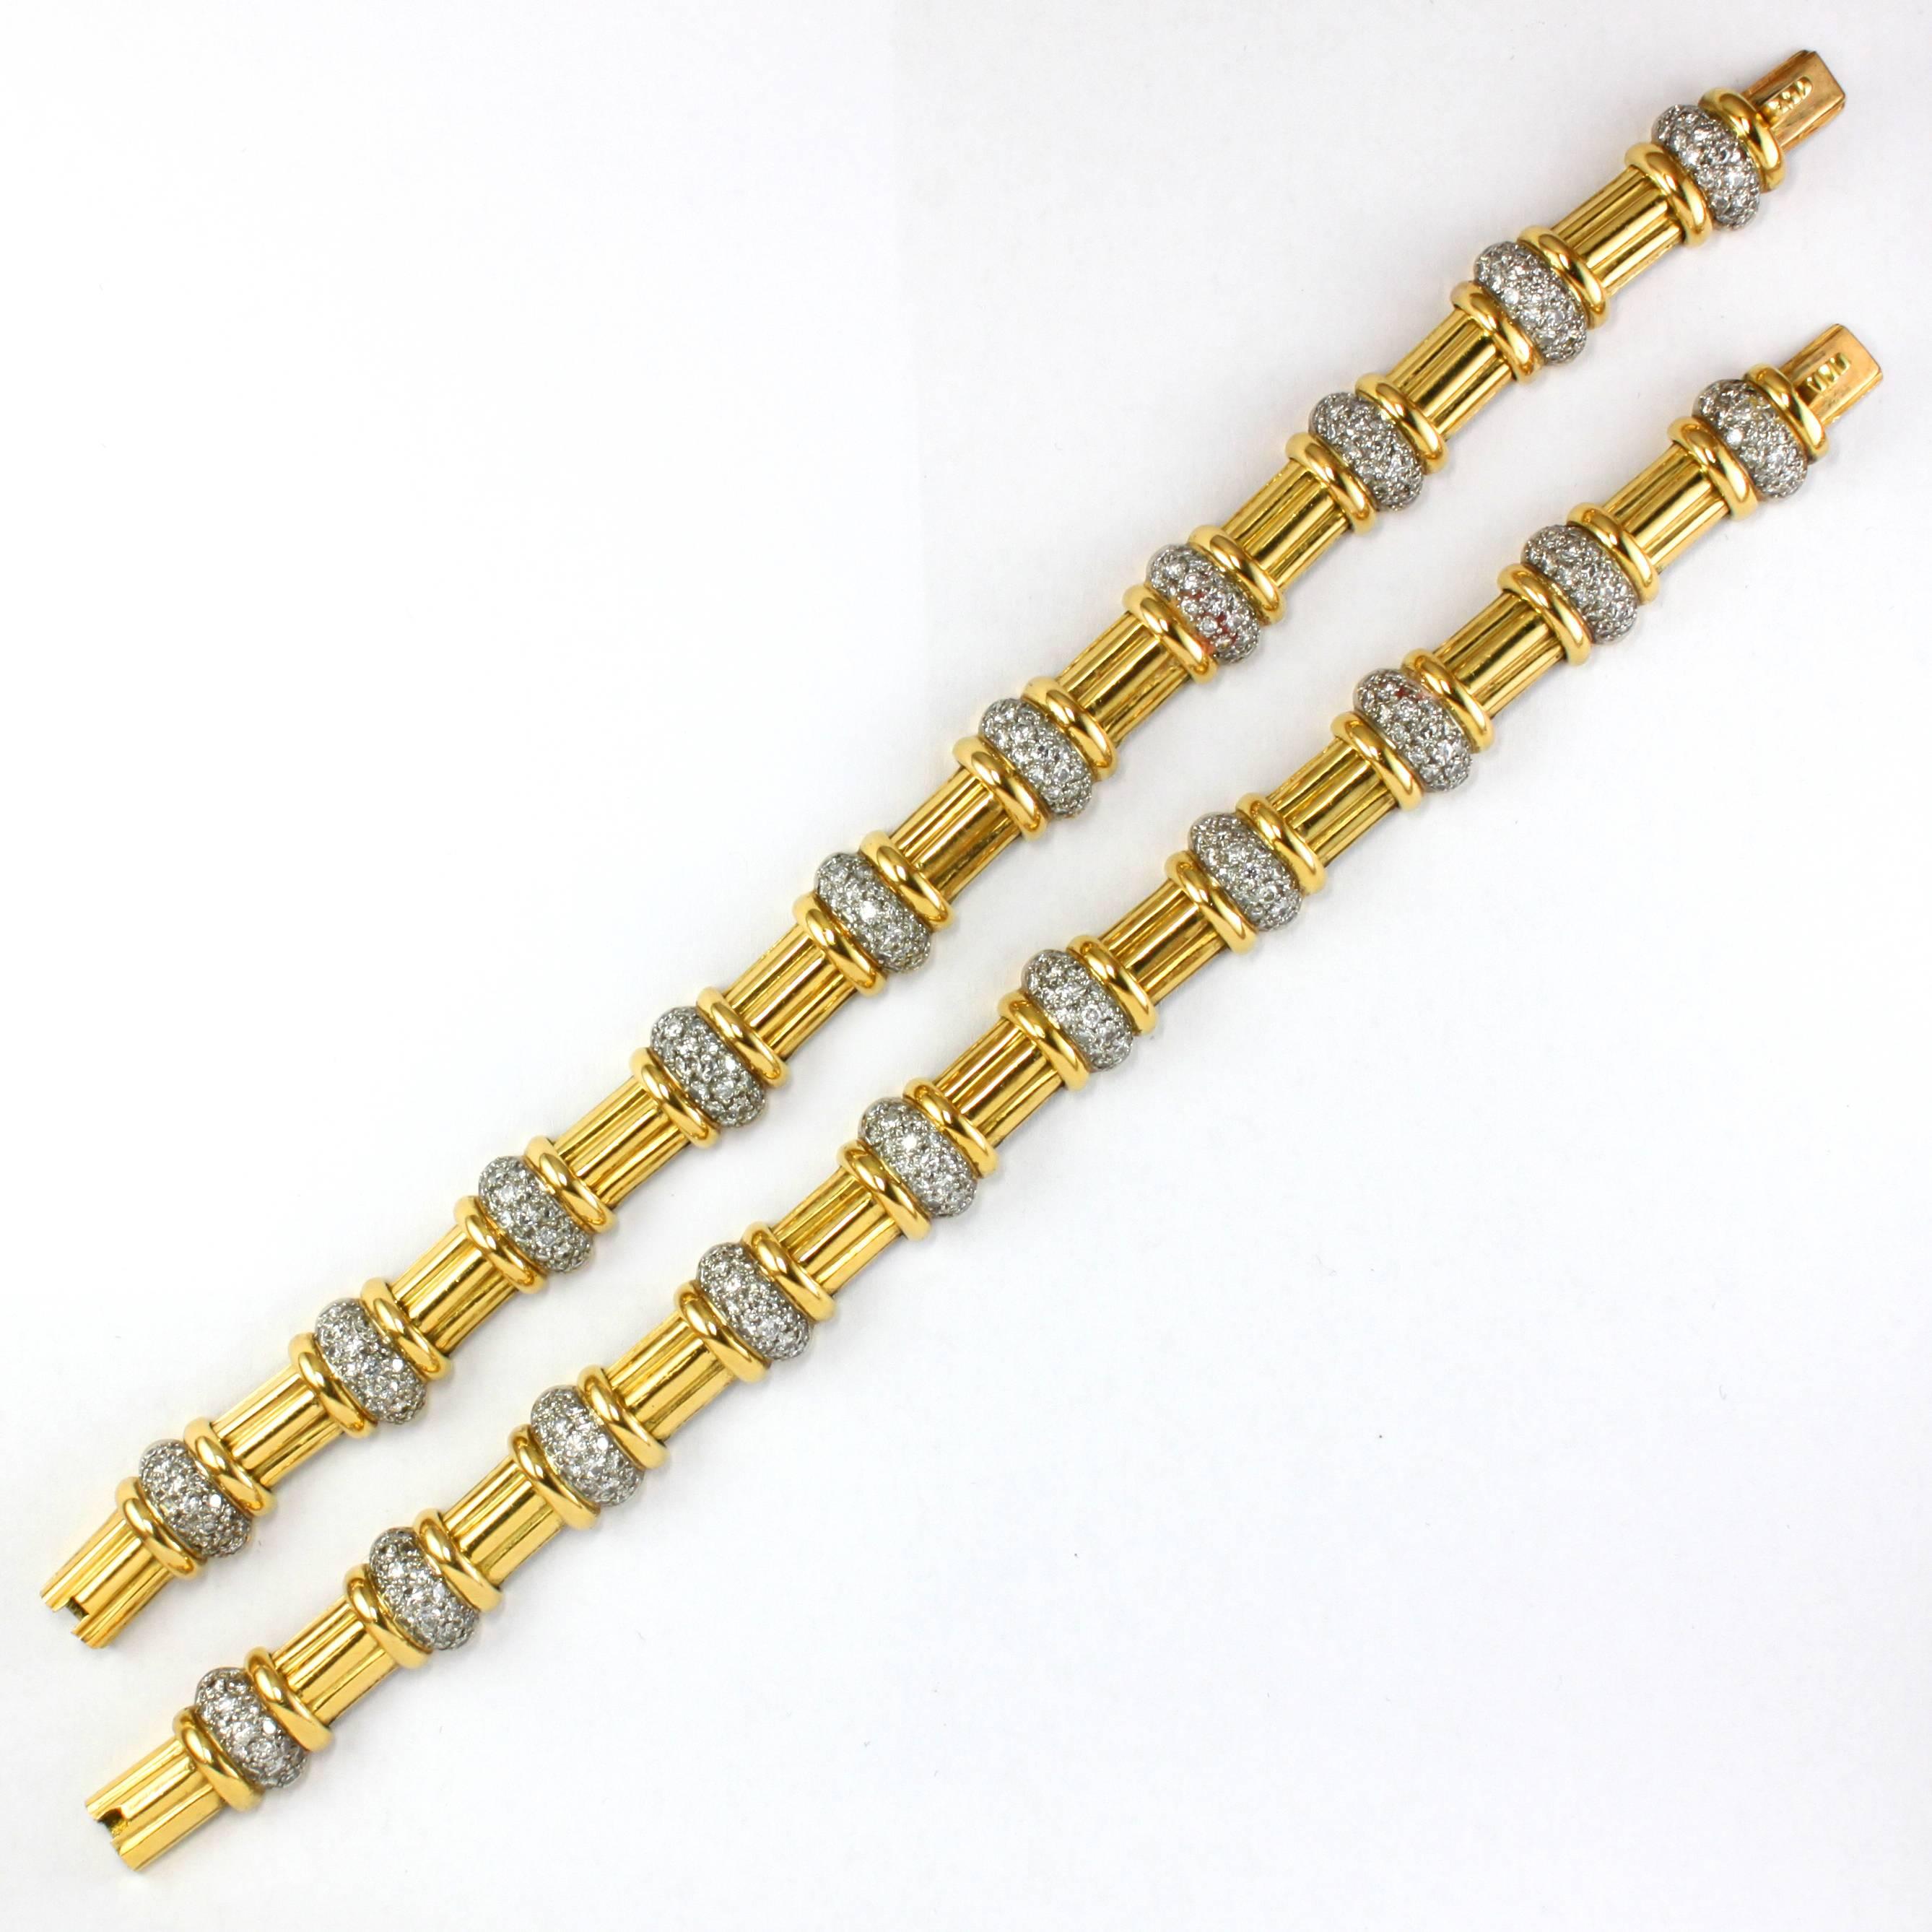 Very chic pair of 18k Gold and Diamond Bracelets in a Bamboo design, consisting of ca. 4 carats of diamonds (E-F colour, VS purity).

Both the bracelets could be combined to form a short choker as well.